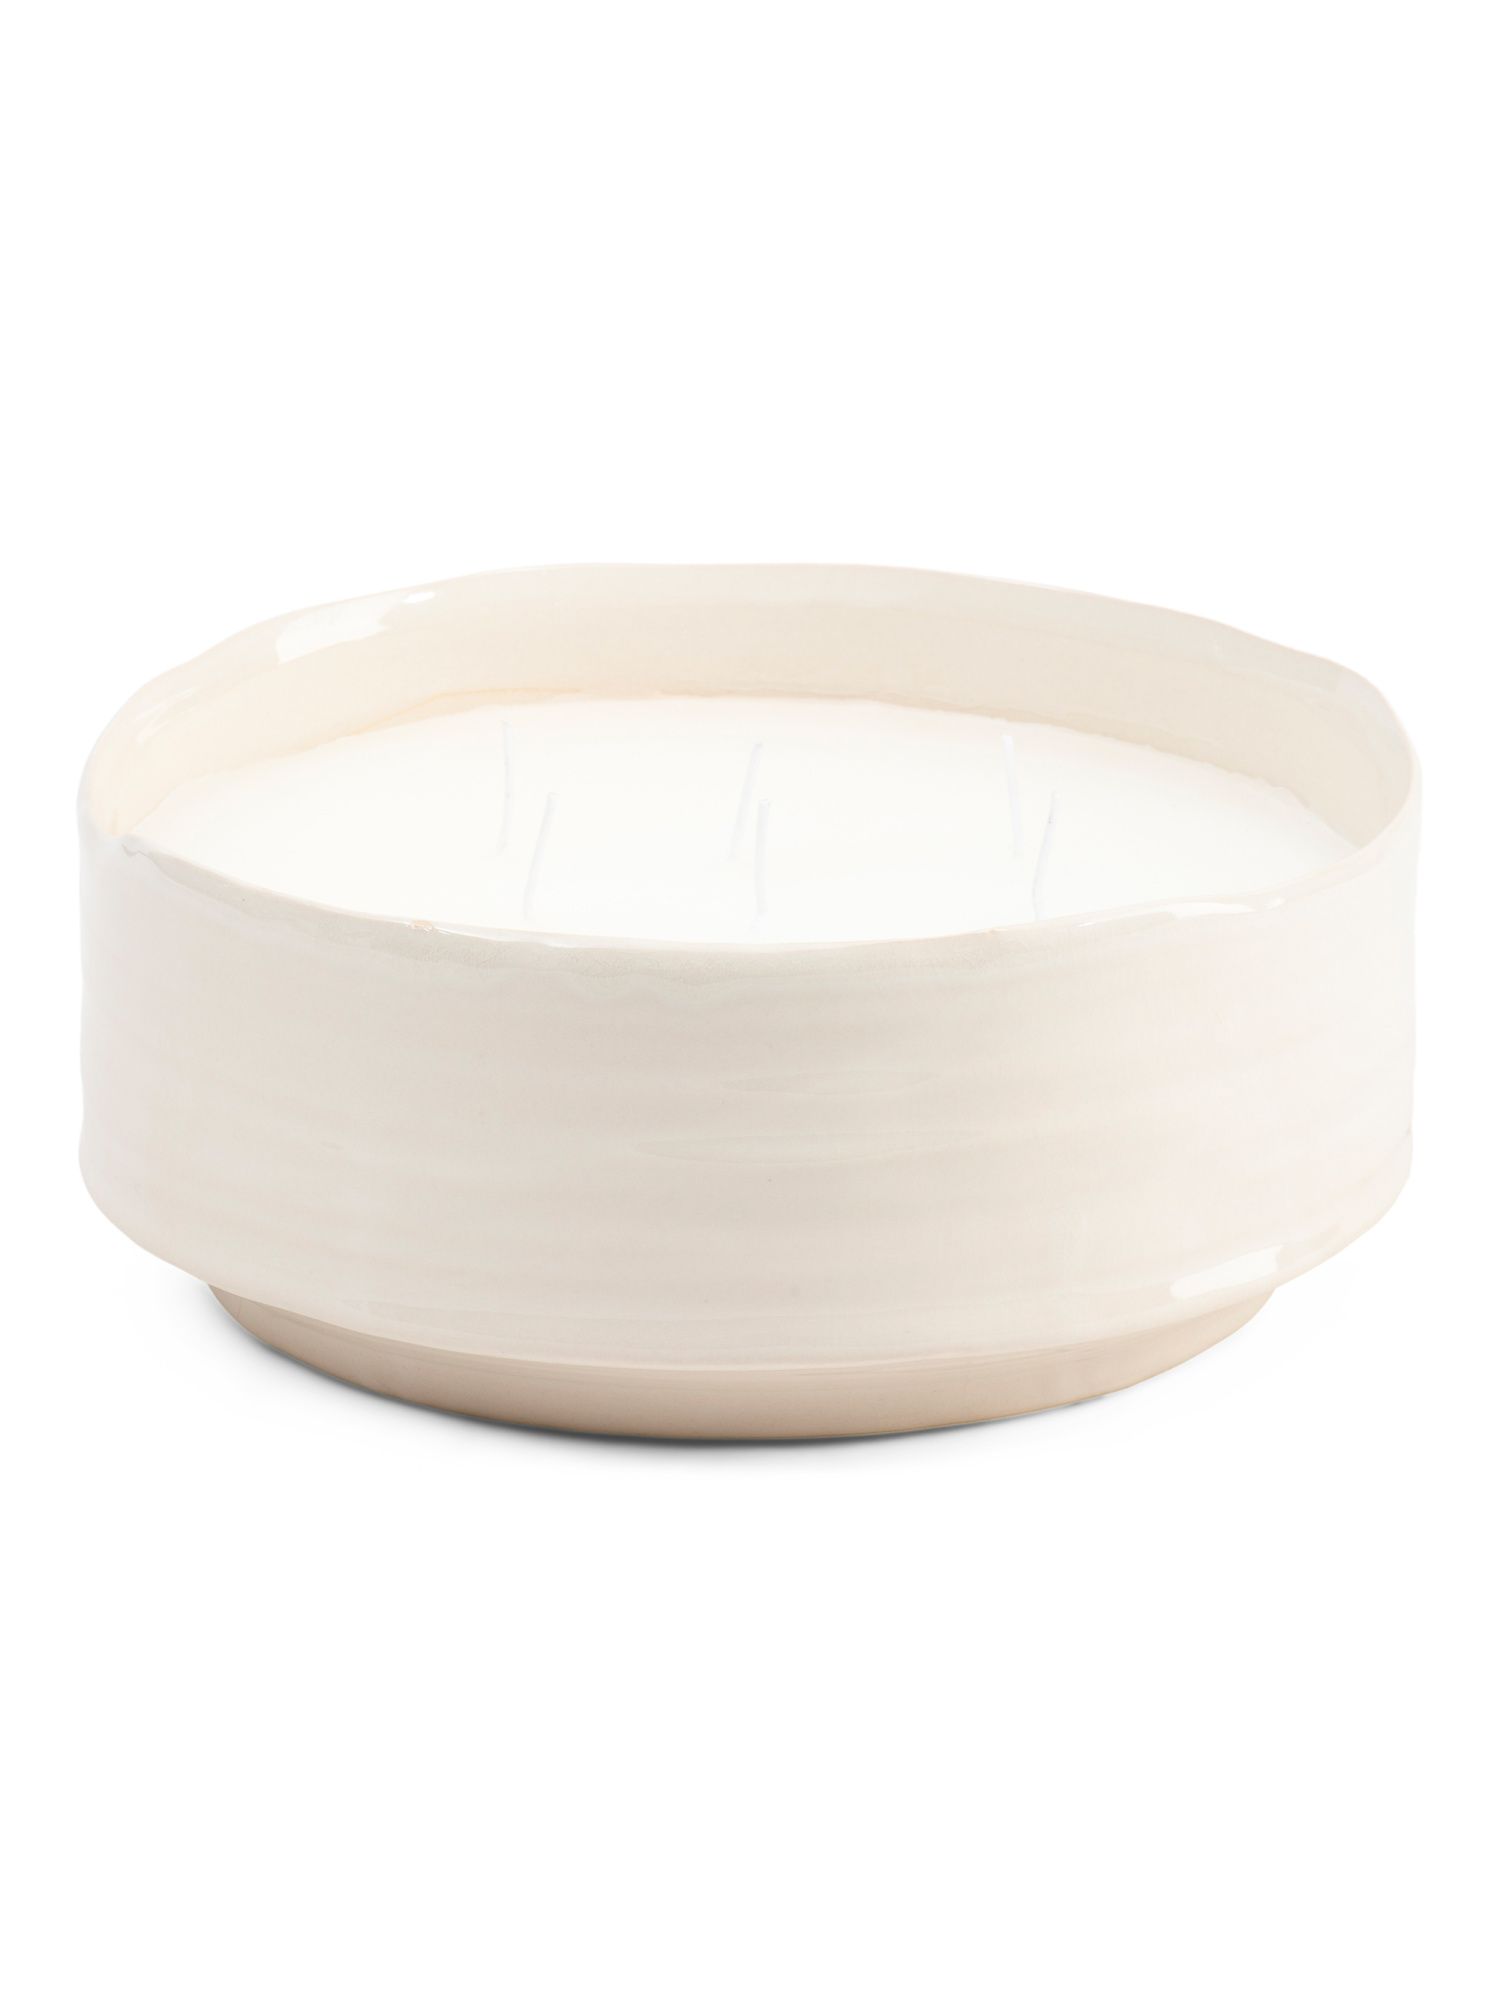 67oz 10in 6 Wick Low Bowl Citronella Candle | Mother's Day Gifts | Marshalls | Marshalls